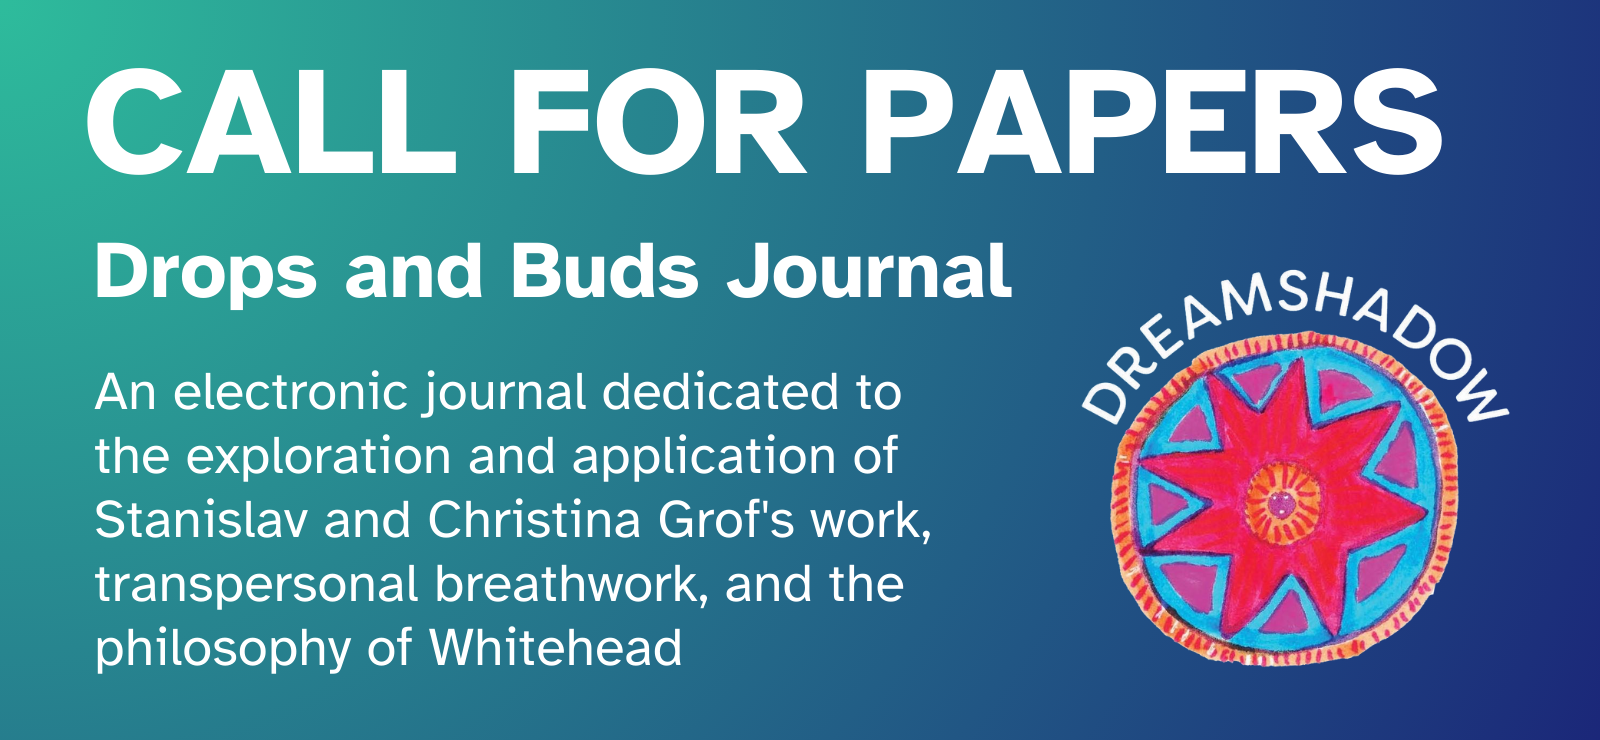 Drops and Buds journal is now accepting submissions